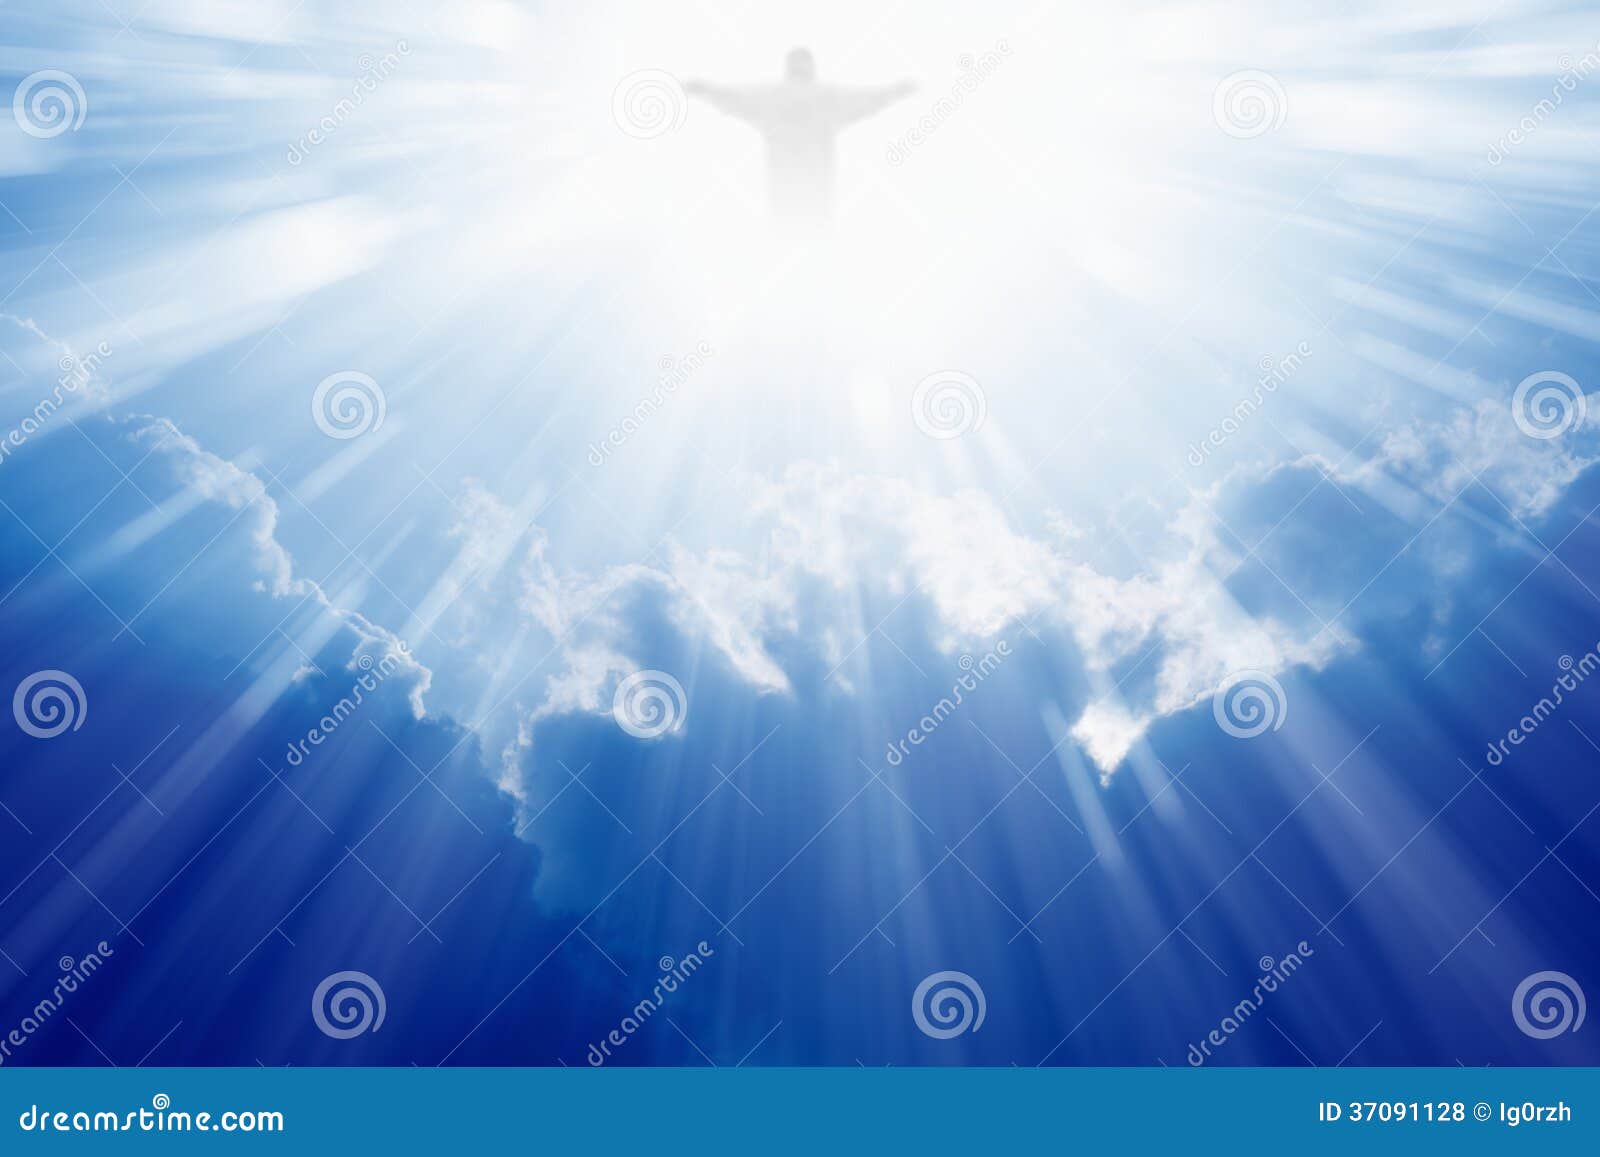 Jesus Christ in heaven stock photo. Image of hope, holy - 37091128